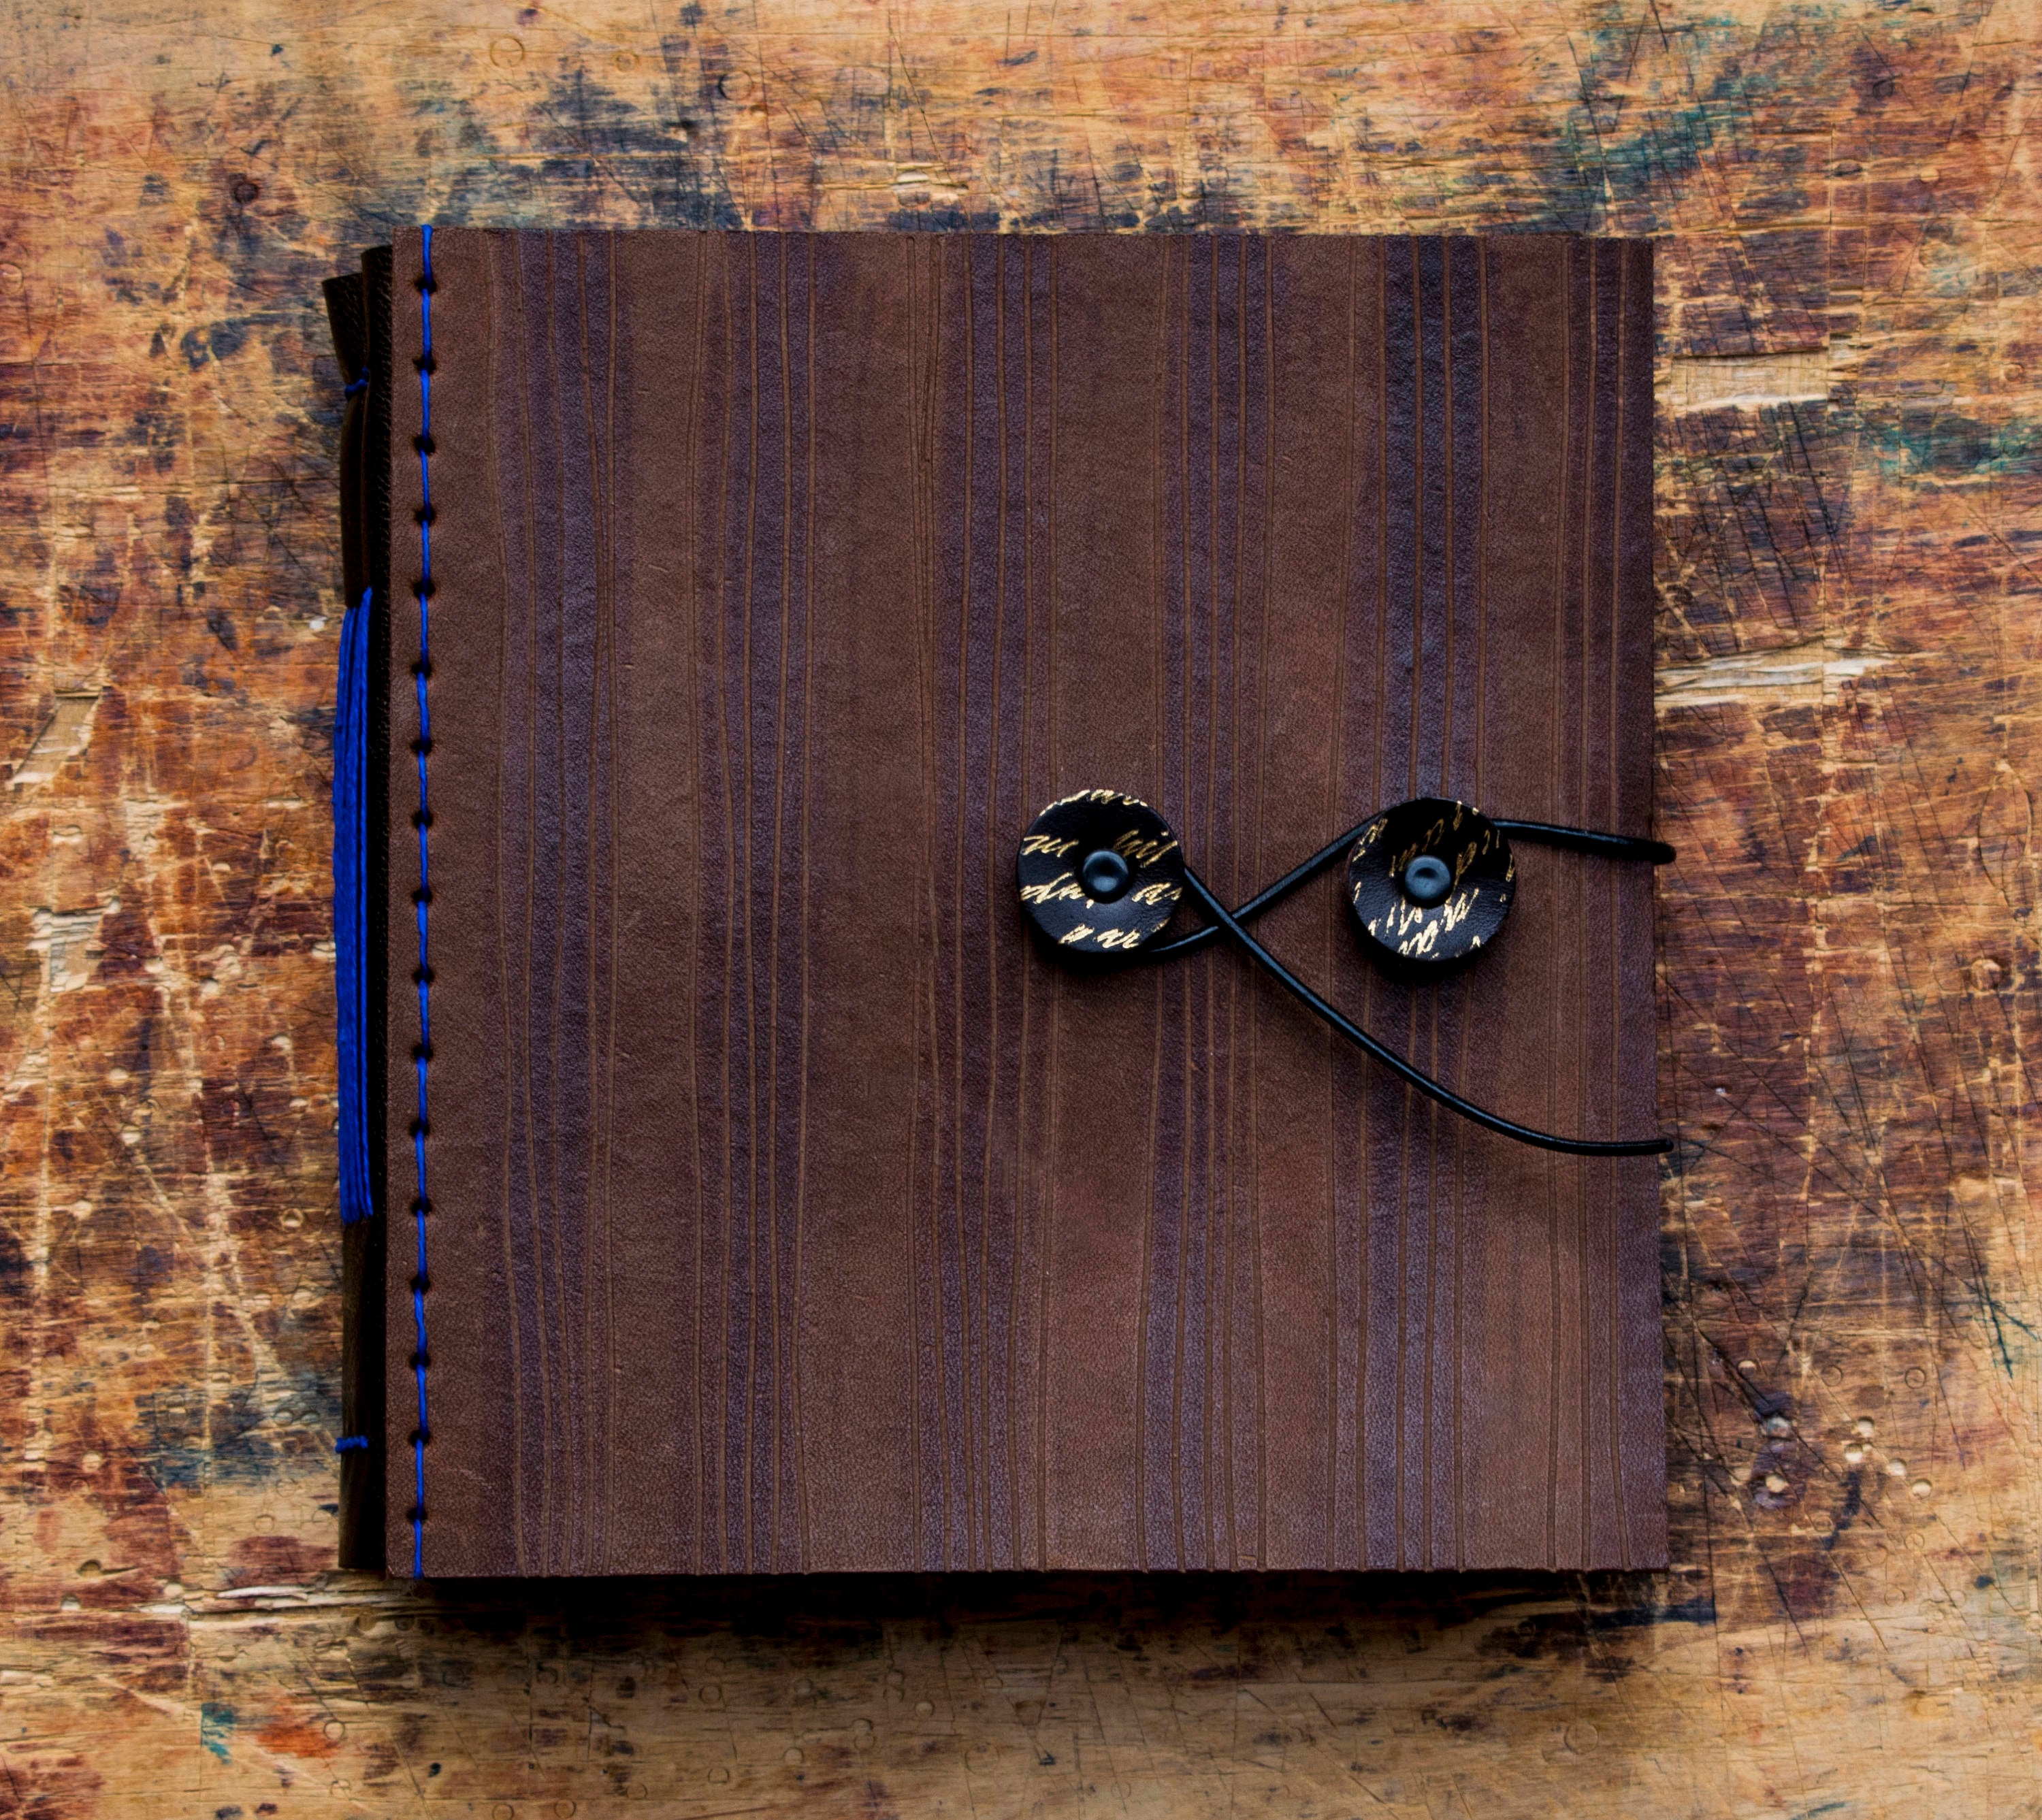 Brown Leather Bound Book stripes and Buttons With Blue Thread Stitches,  Handmade Medium Large Diary, Journal, Sketchbook, Notebook Etc 